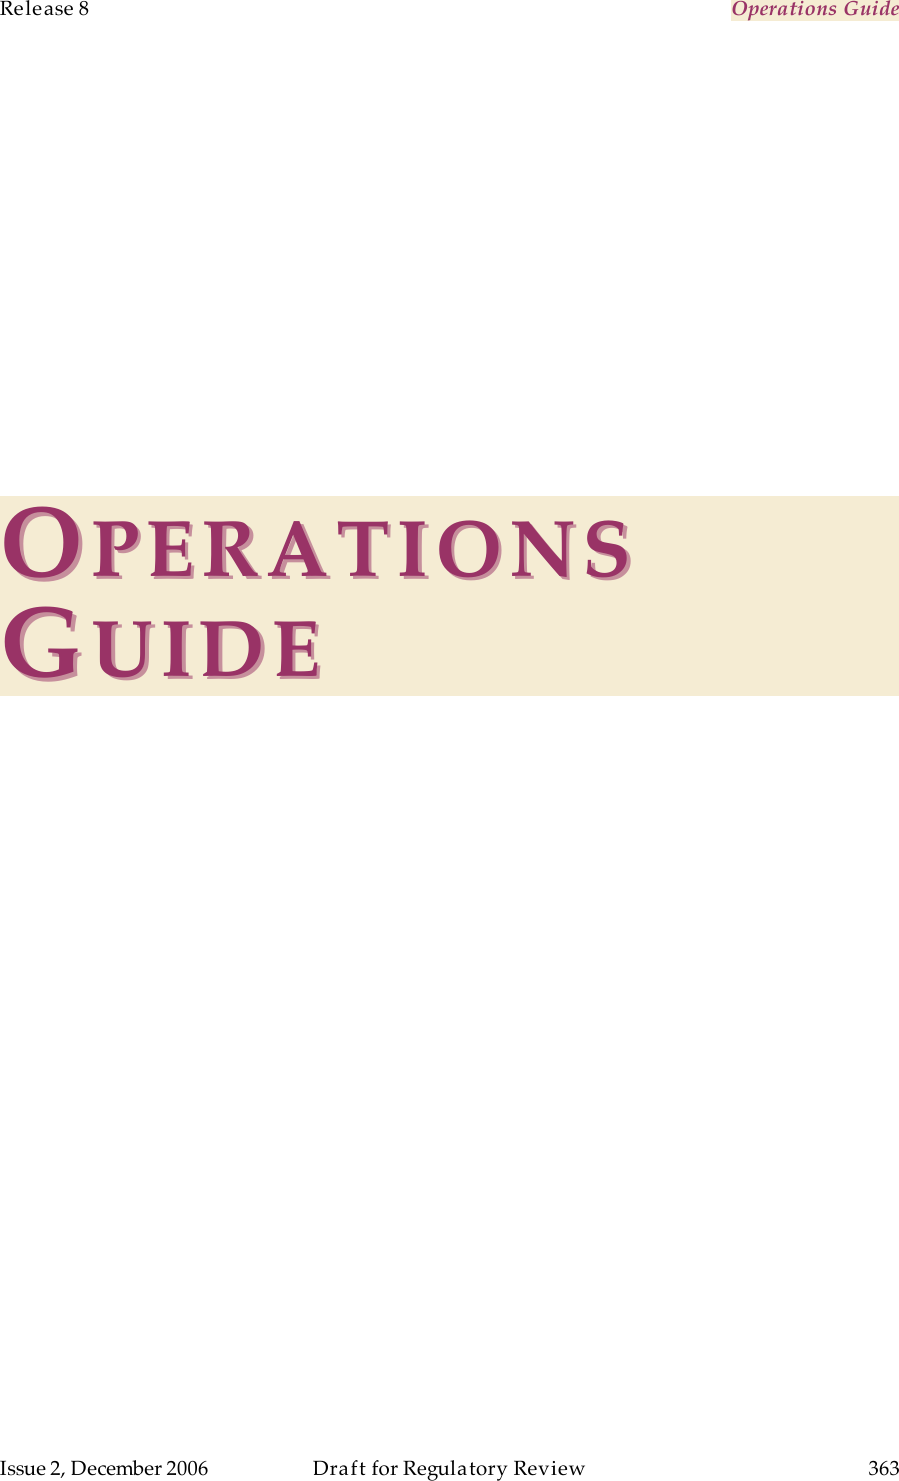 Release 8    Operations Guide   Issue 2, December 2006  Draft for Regulatory Review  363     OOPERATIONS PERATIONS GGUIDEUIDE   